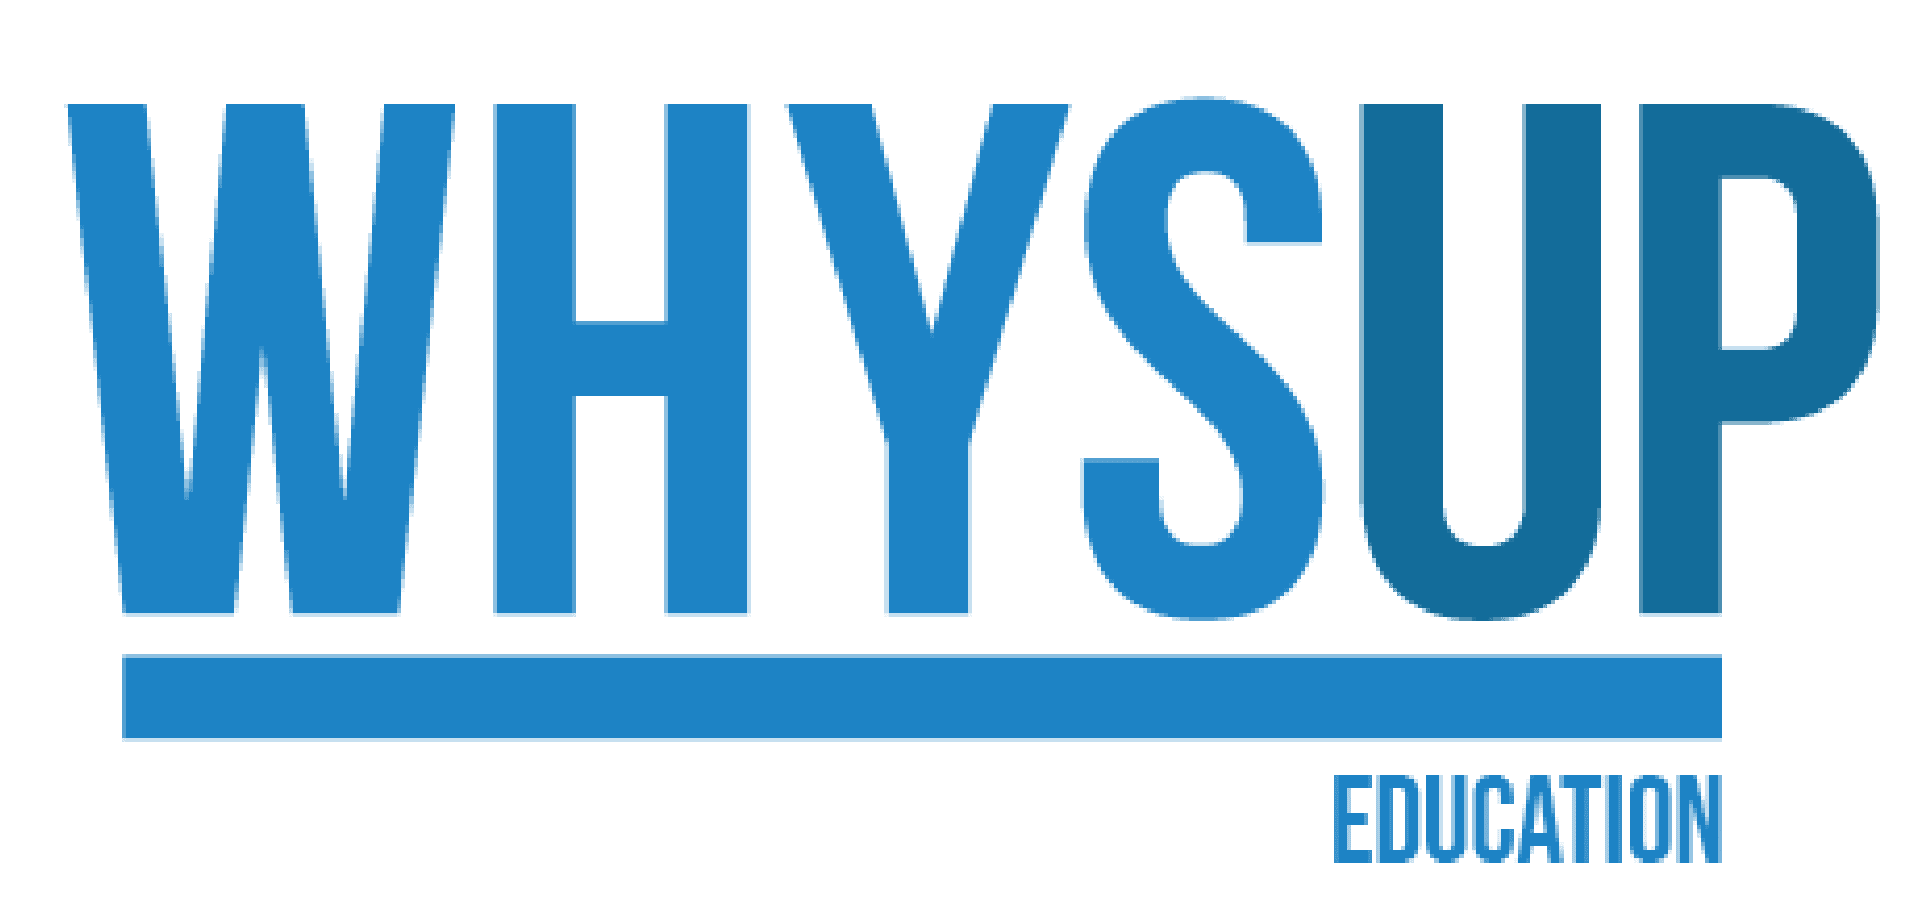 Year 6 Primary School Programme Whysup